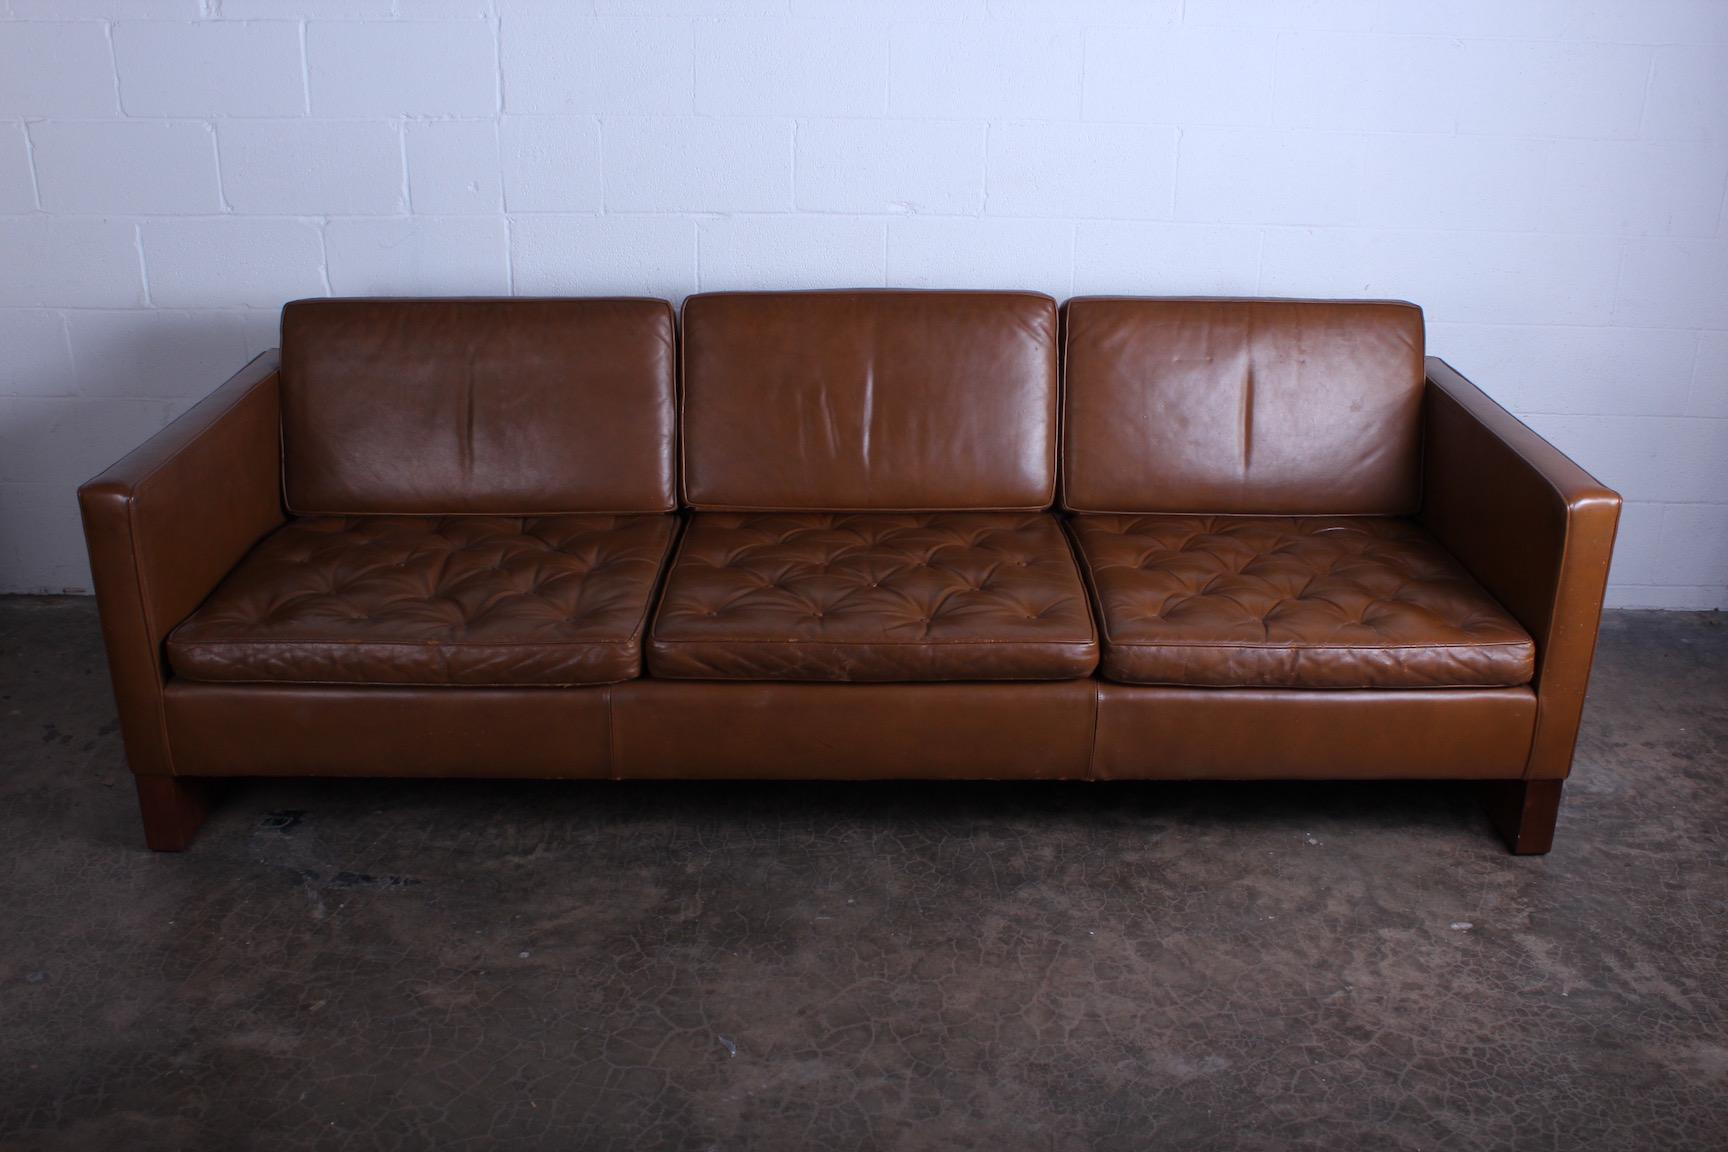 Rare sofa designed by Mies van der Rohe in 1930 and sold through Knoll for a short time in 1960. This sofa retained it's original leather with wonderful patina.